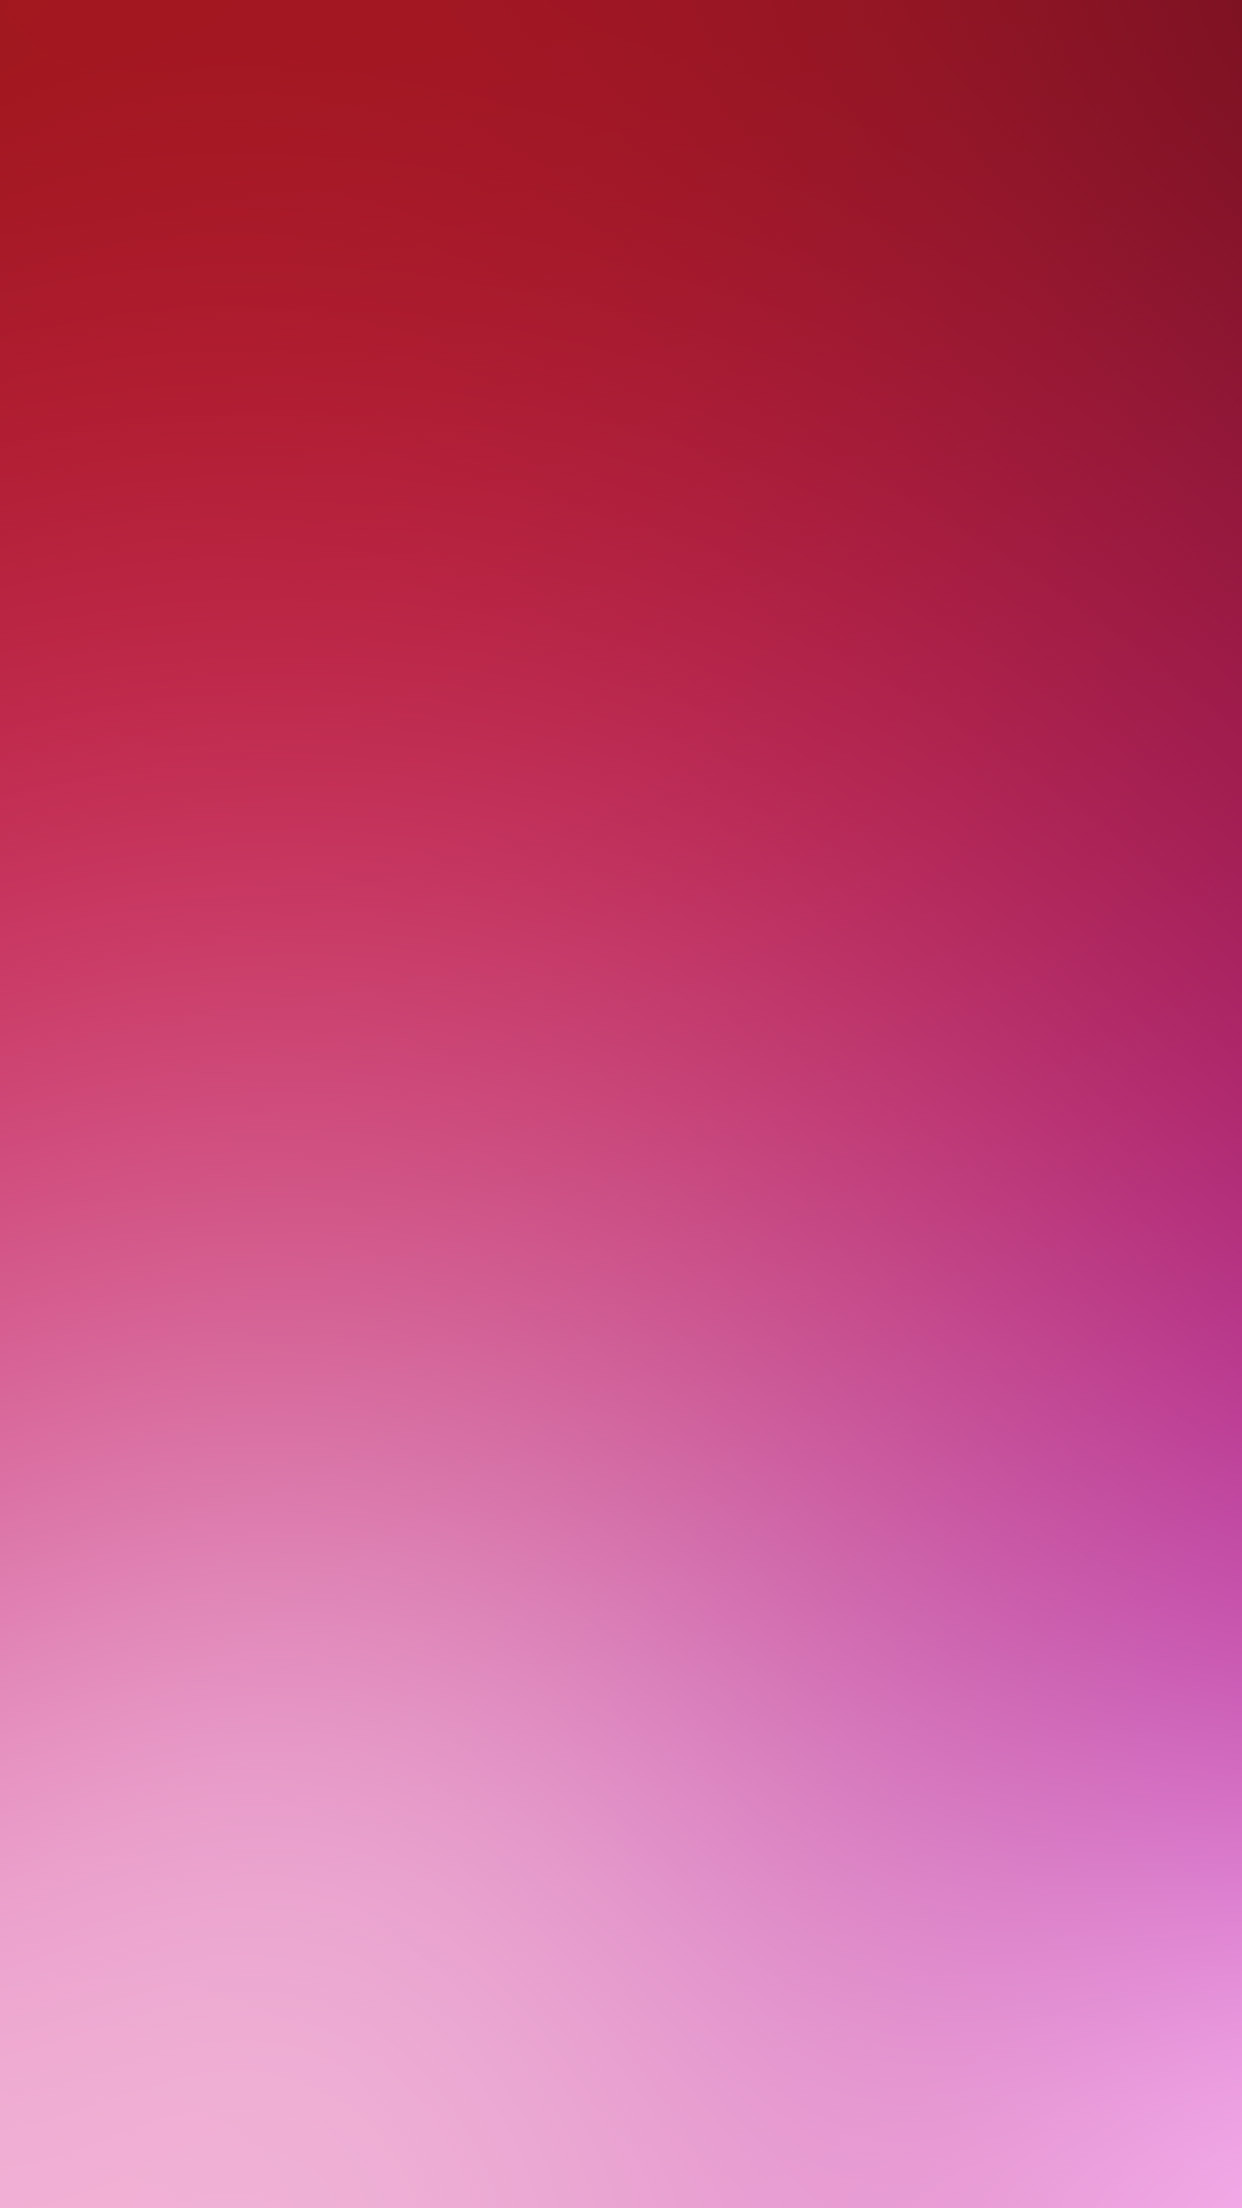 1242x2208  Plus Red Wallpaper Apple iPhone 6 - Bing images